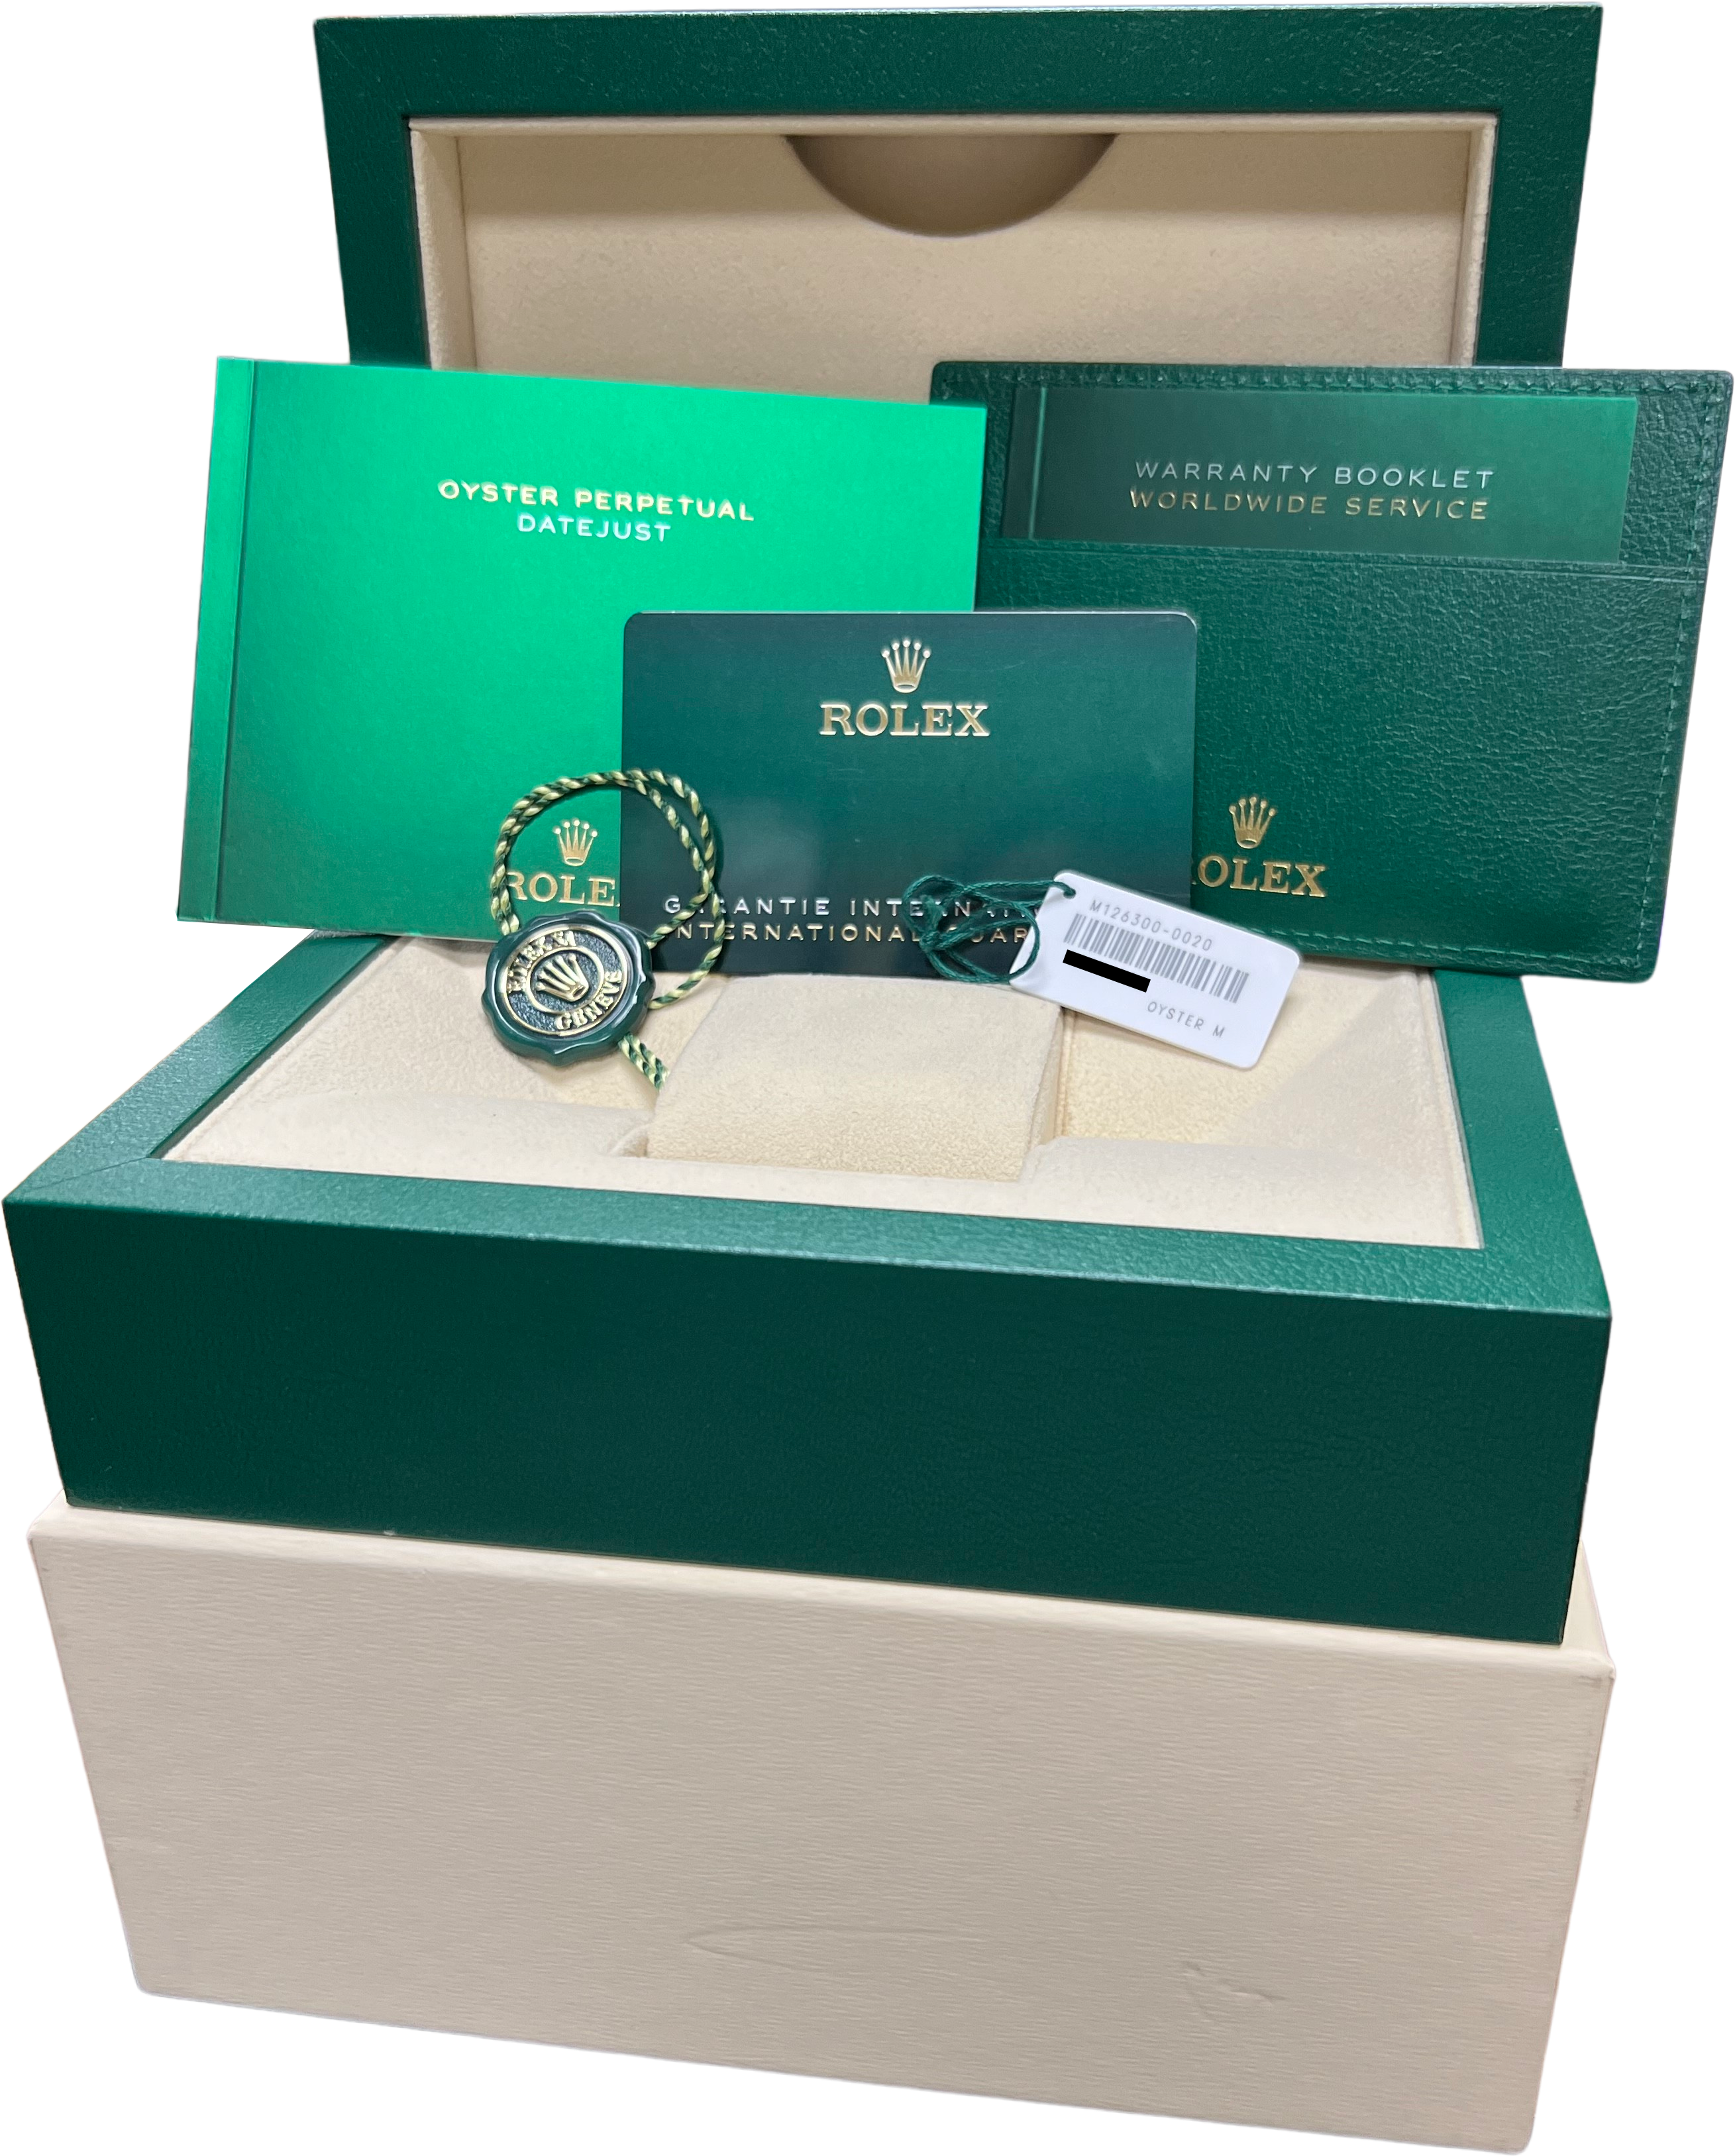 2022 NEW PAPERS Rolex DateJust 41 MINT GREEN JUBILEE Stainless Watch 126300 BOX